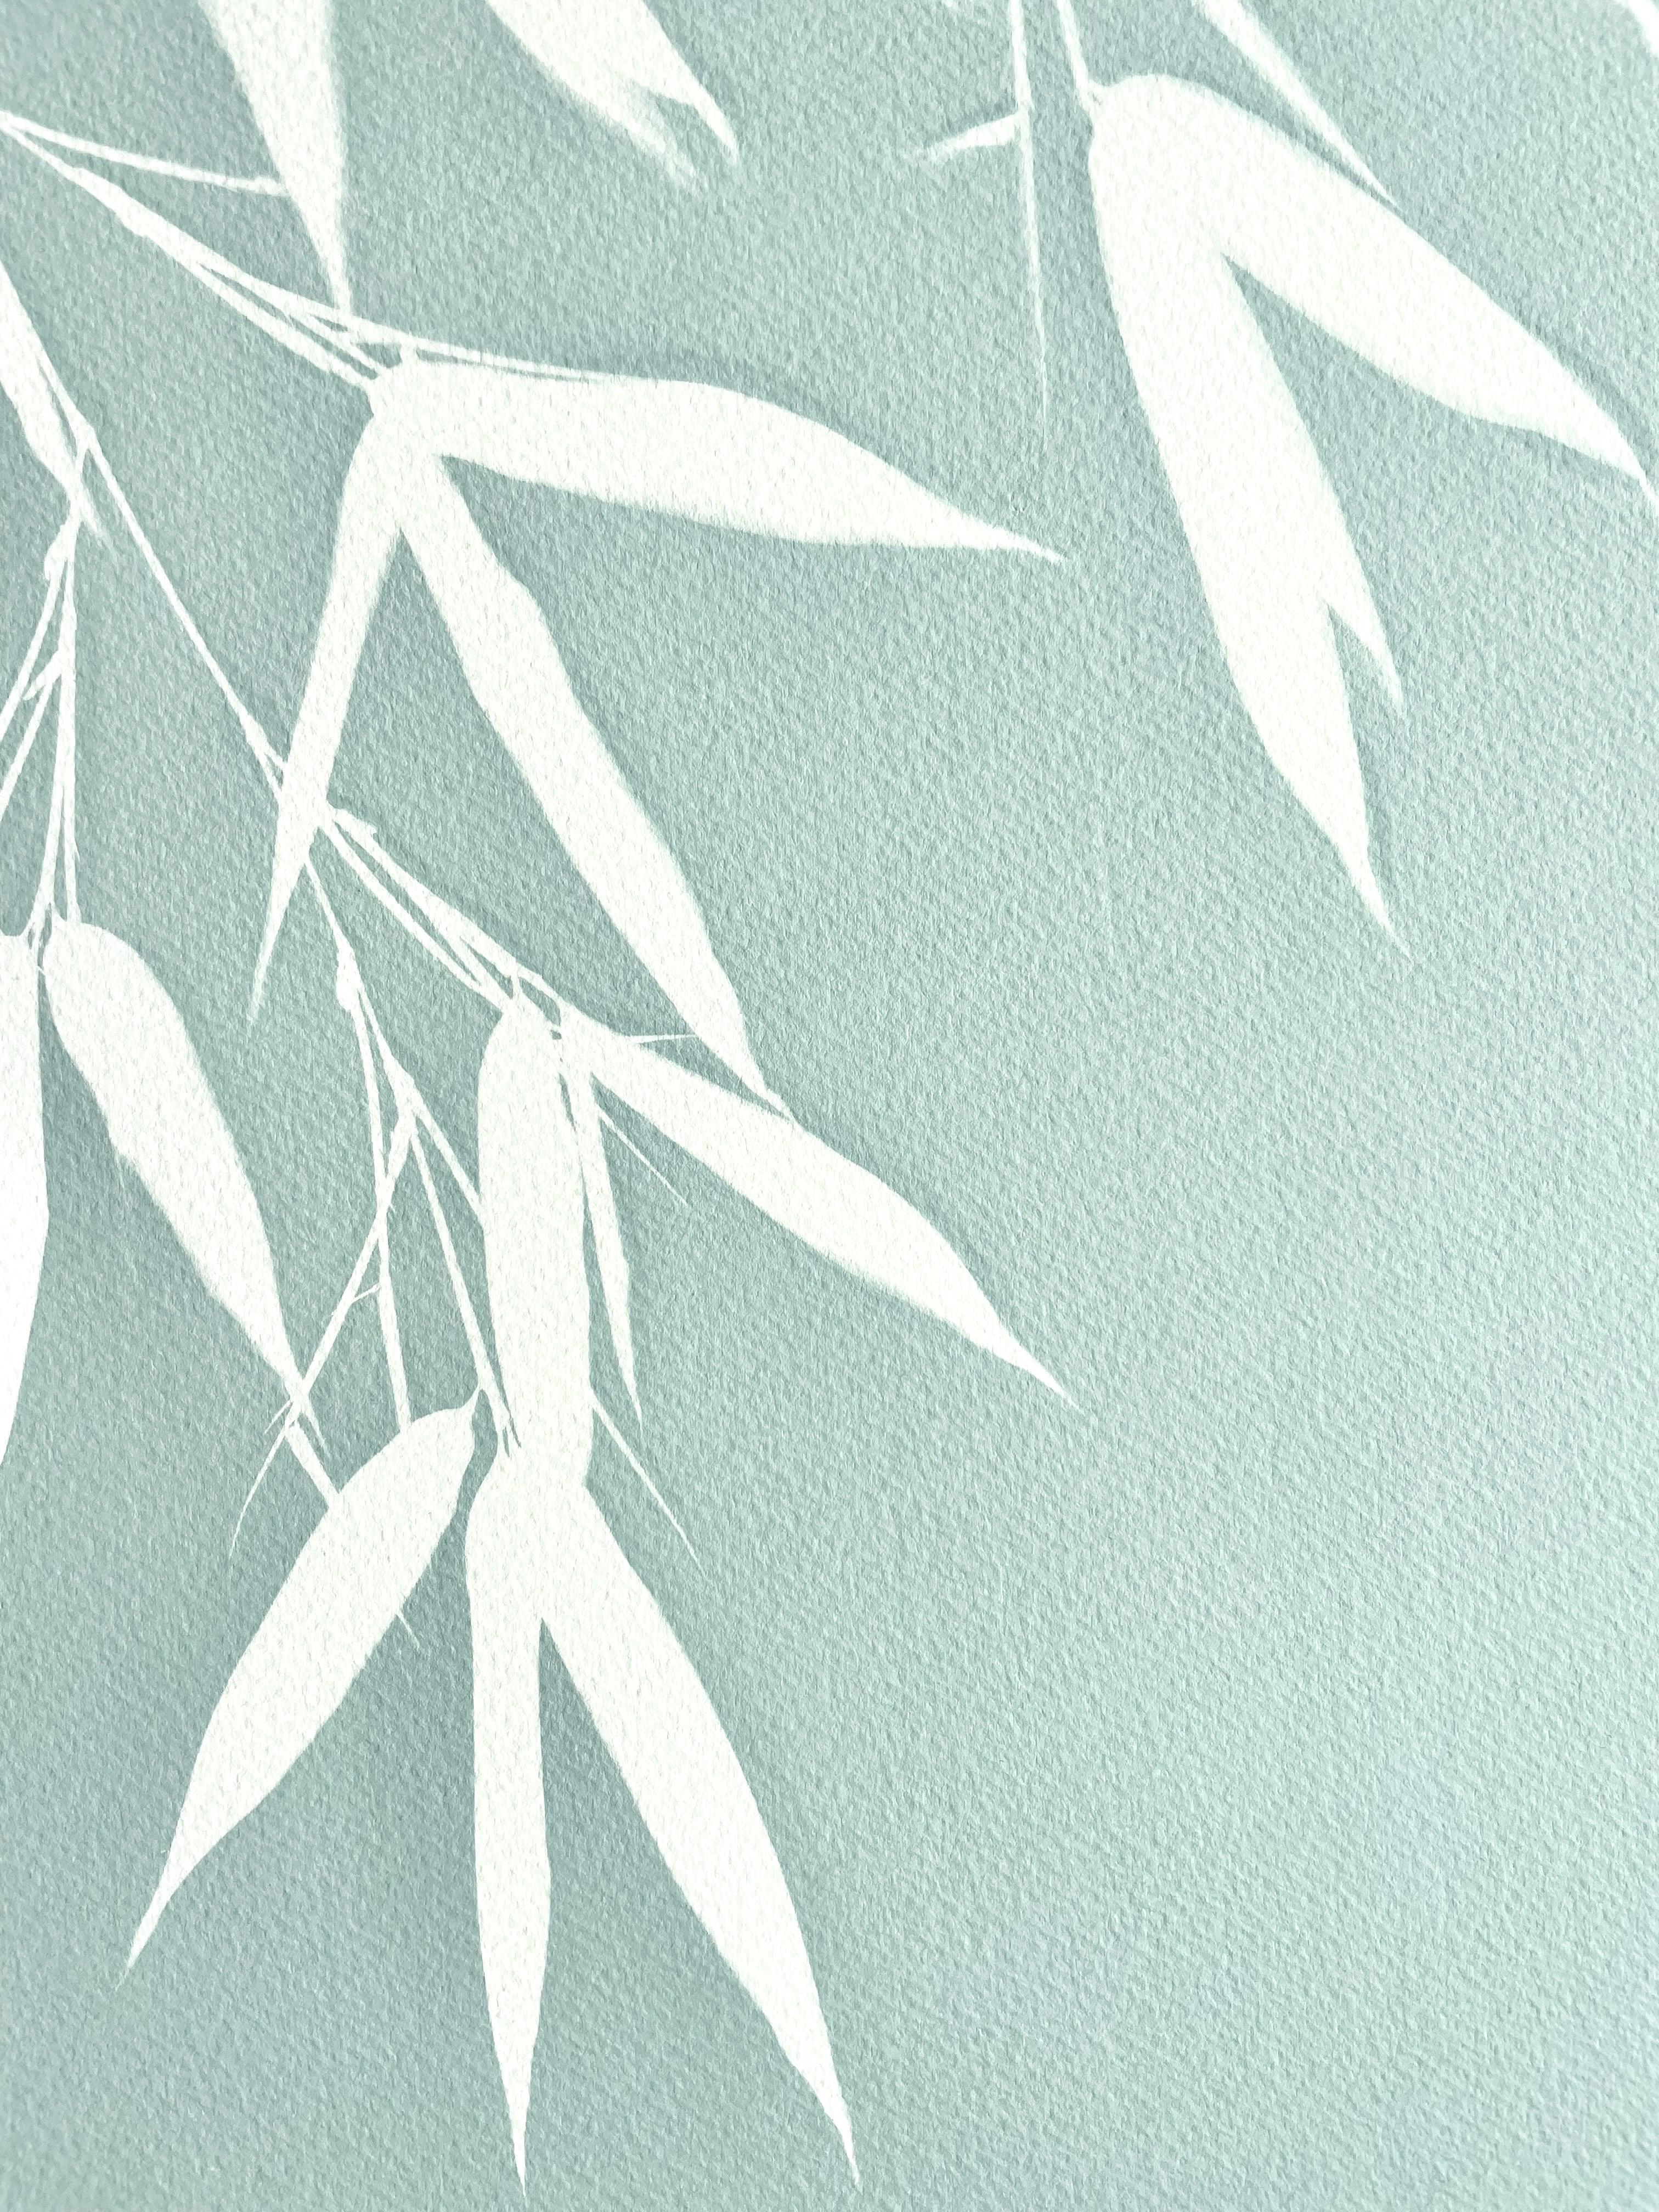 Celadon Bamboo (hand-printed botanical cyanotype, 24 x 18 inches) For Sale 1